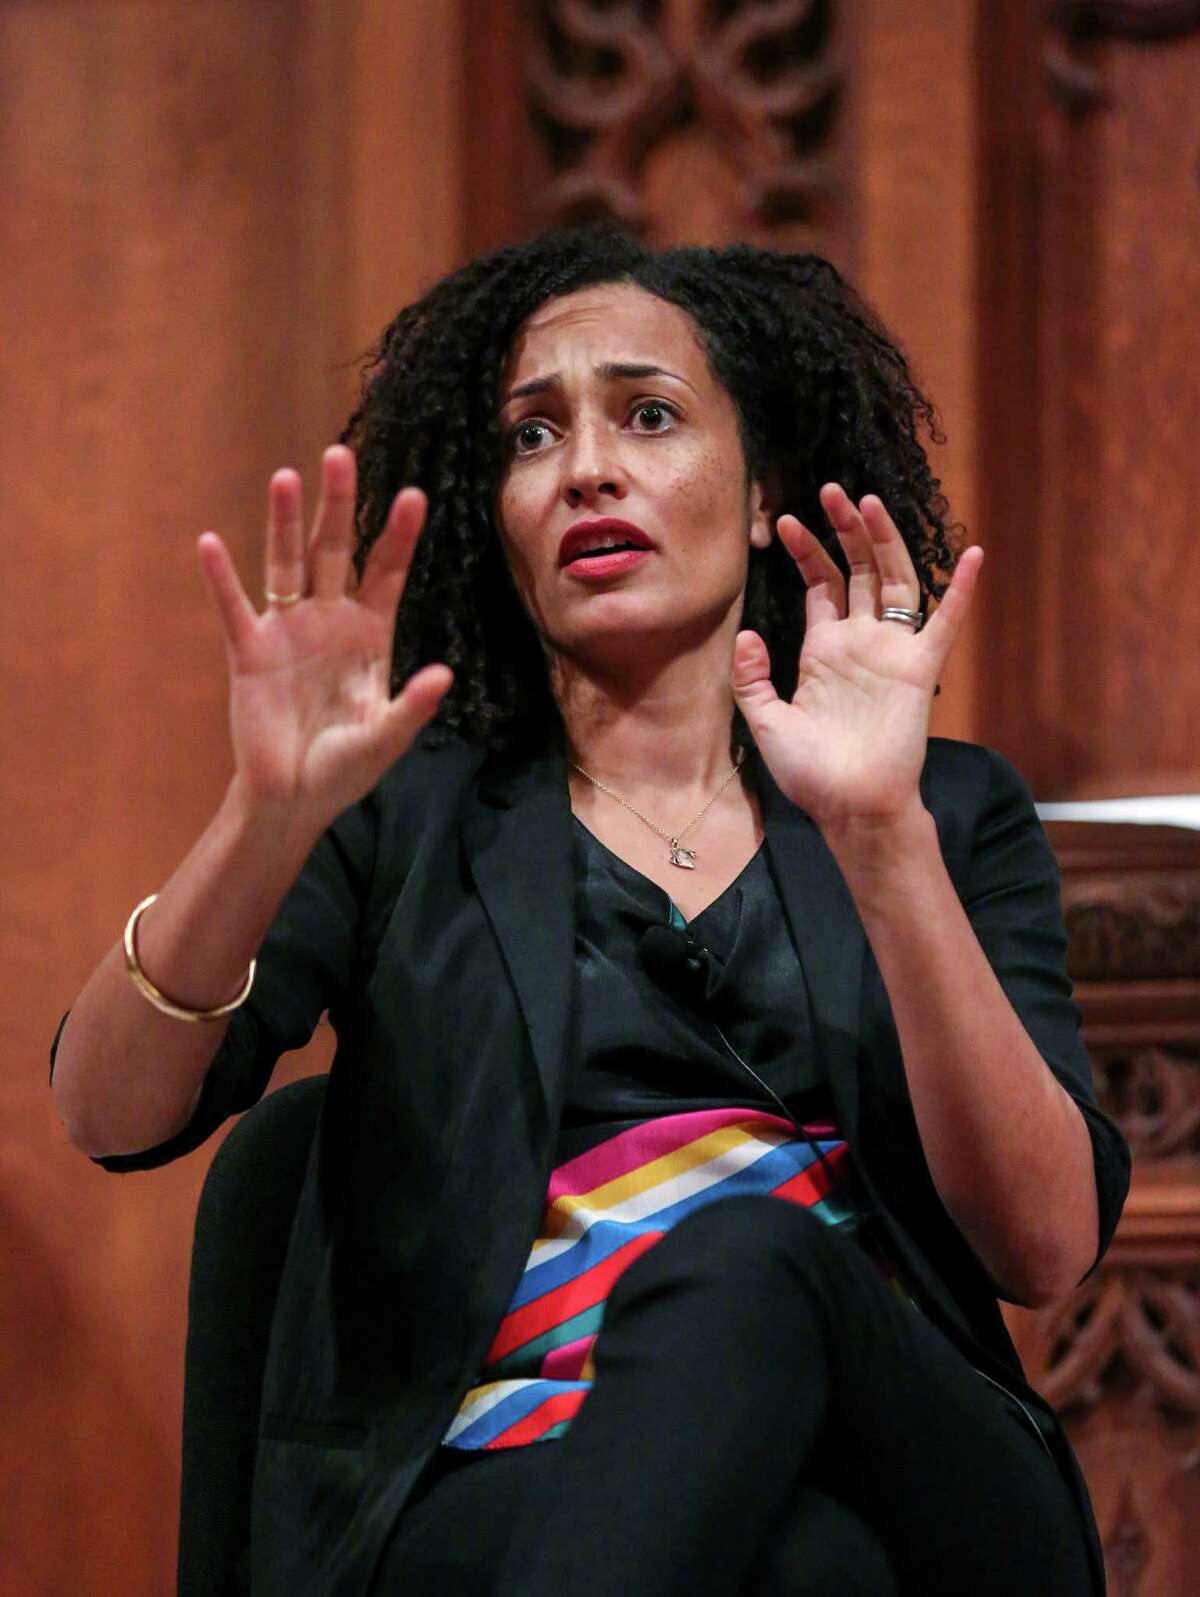 Author Zadie Smith likes writing that makes readers hear voices.